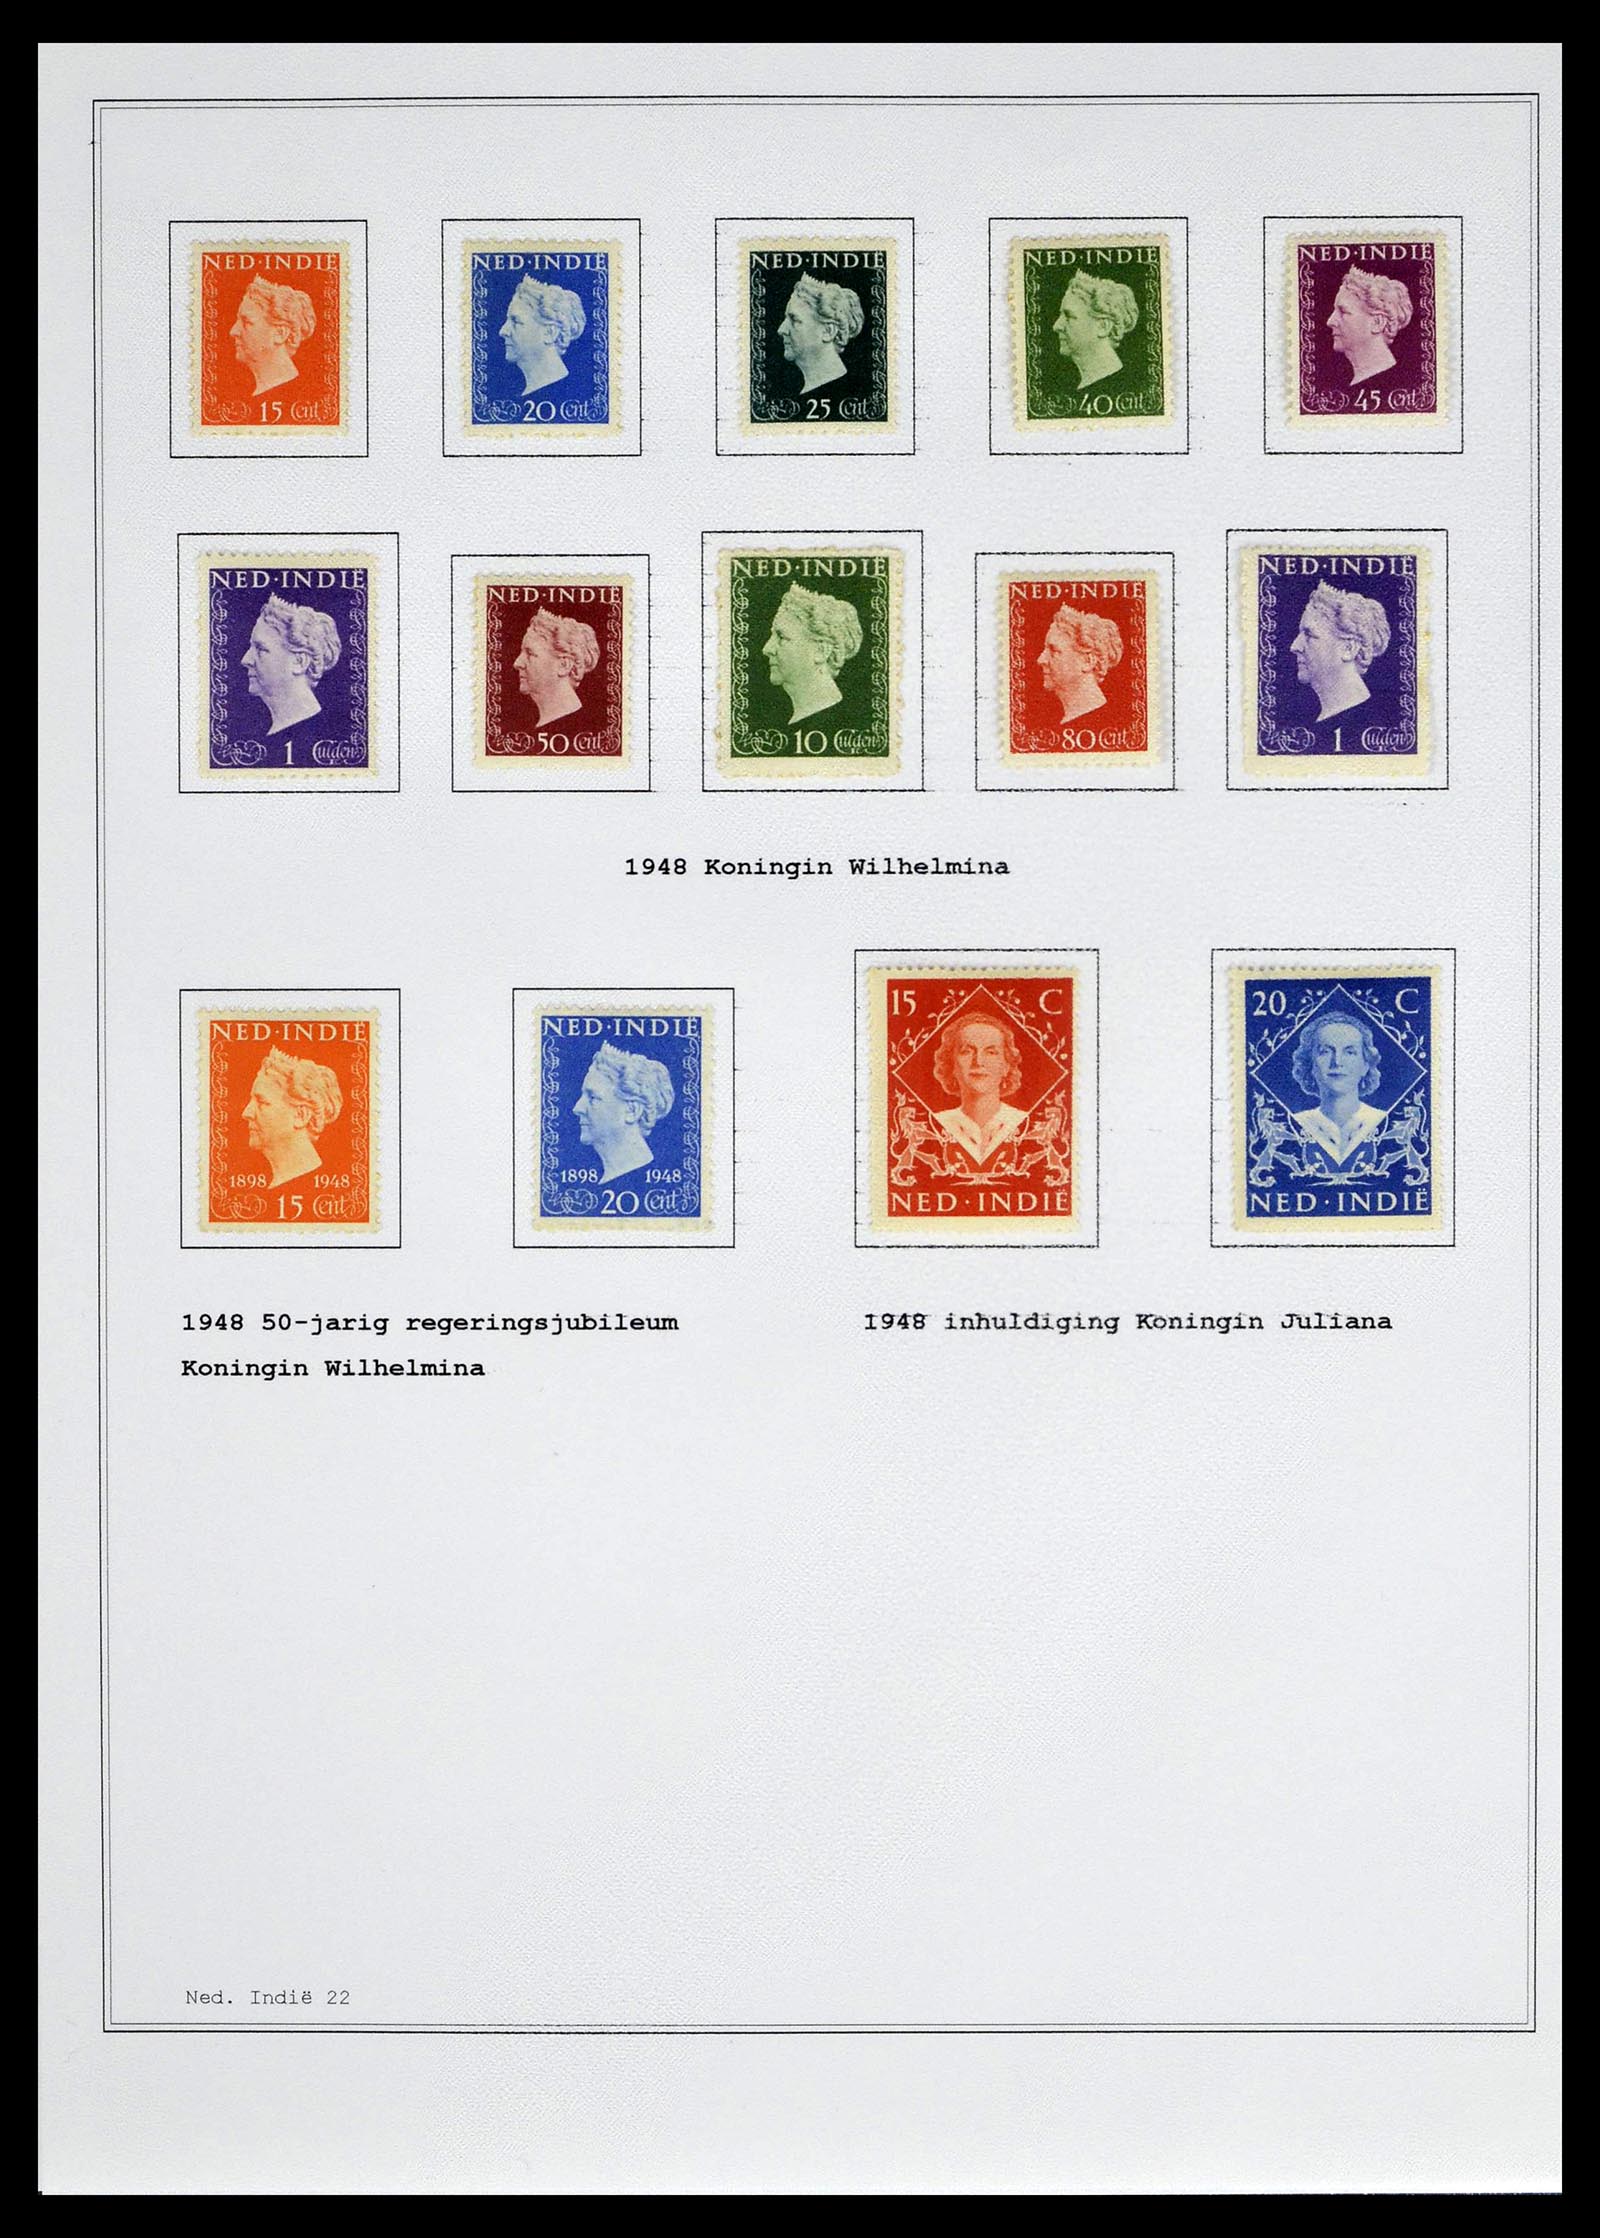 39026 0044 - Stamp collection 39026 Dutch east Indies and Suriname 1864-1975.